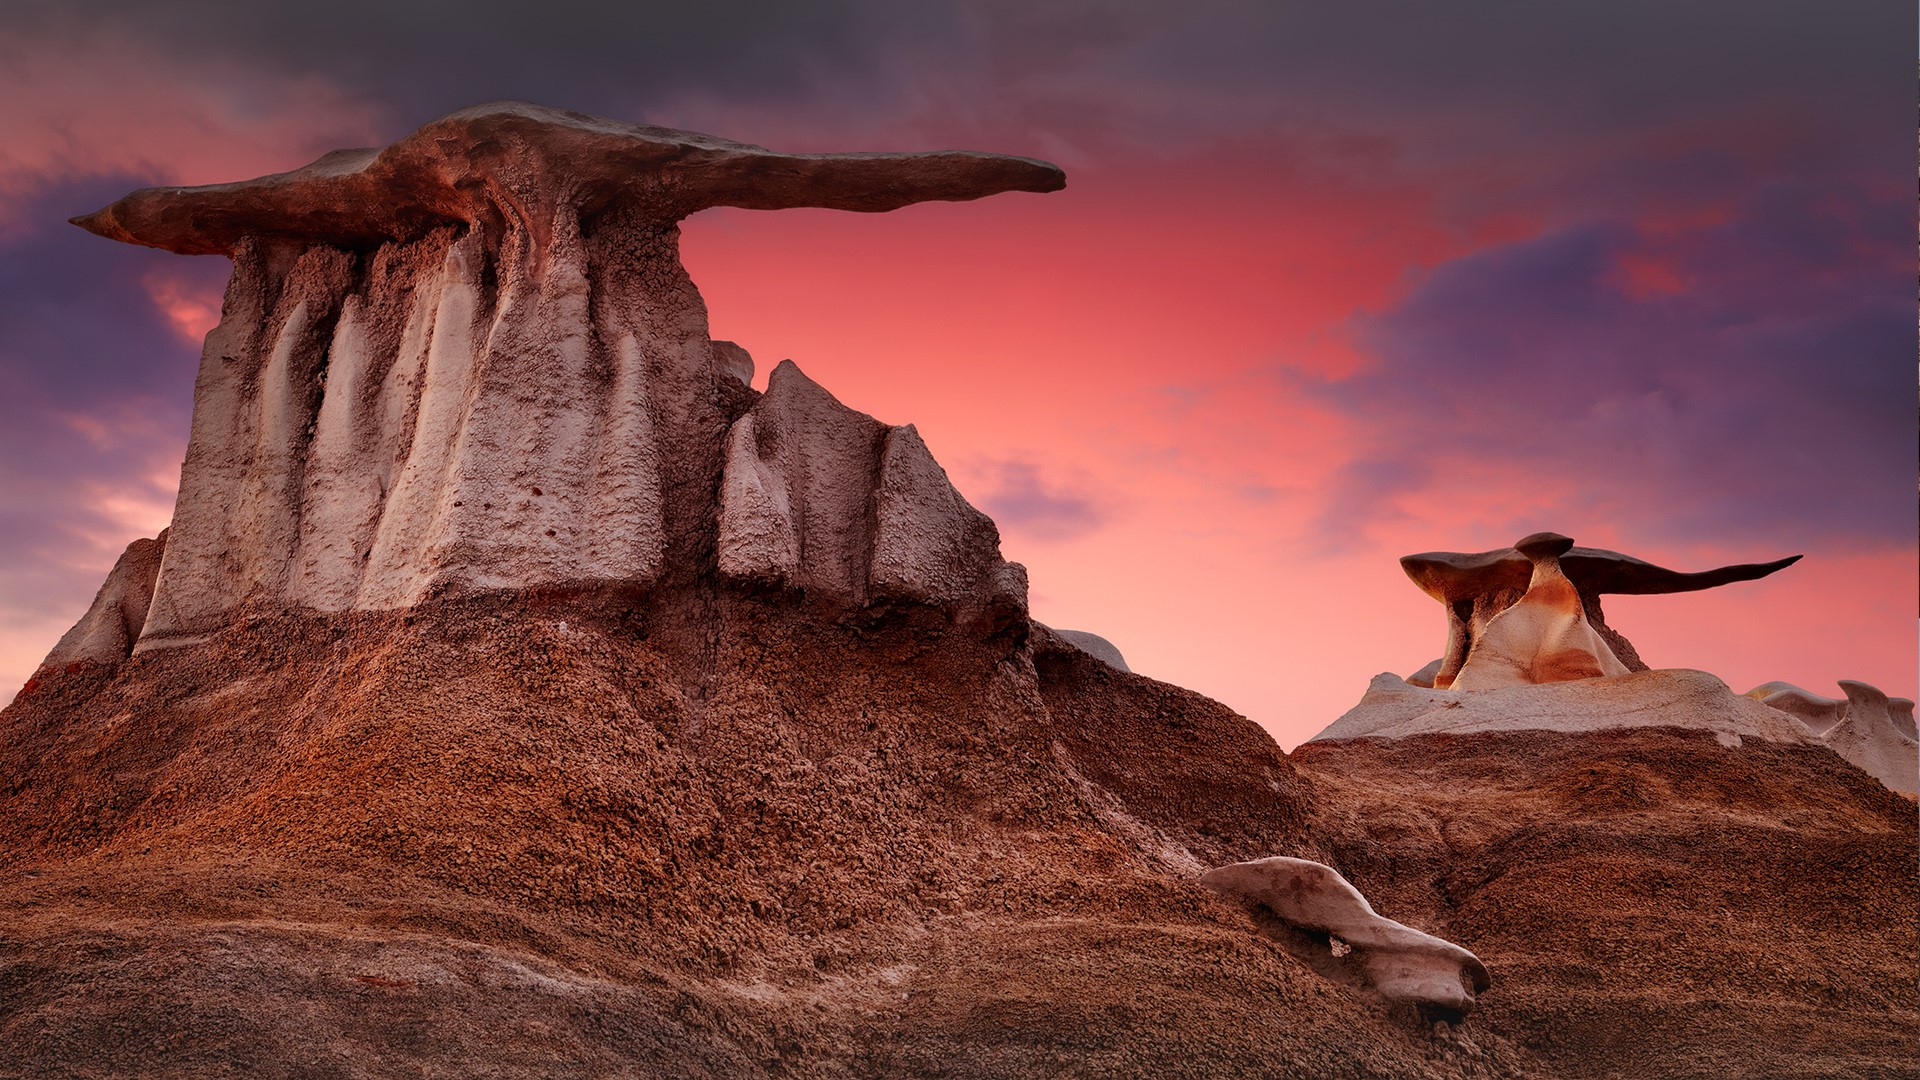 Nature Landscape Clouds Mud Sky Sunset New Mexico USA Rock Formation Rocks 1920x1080